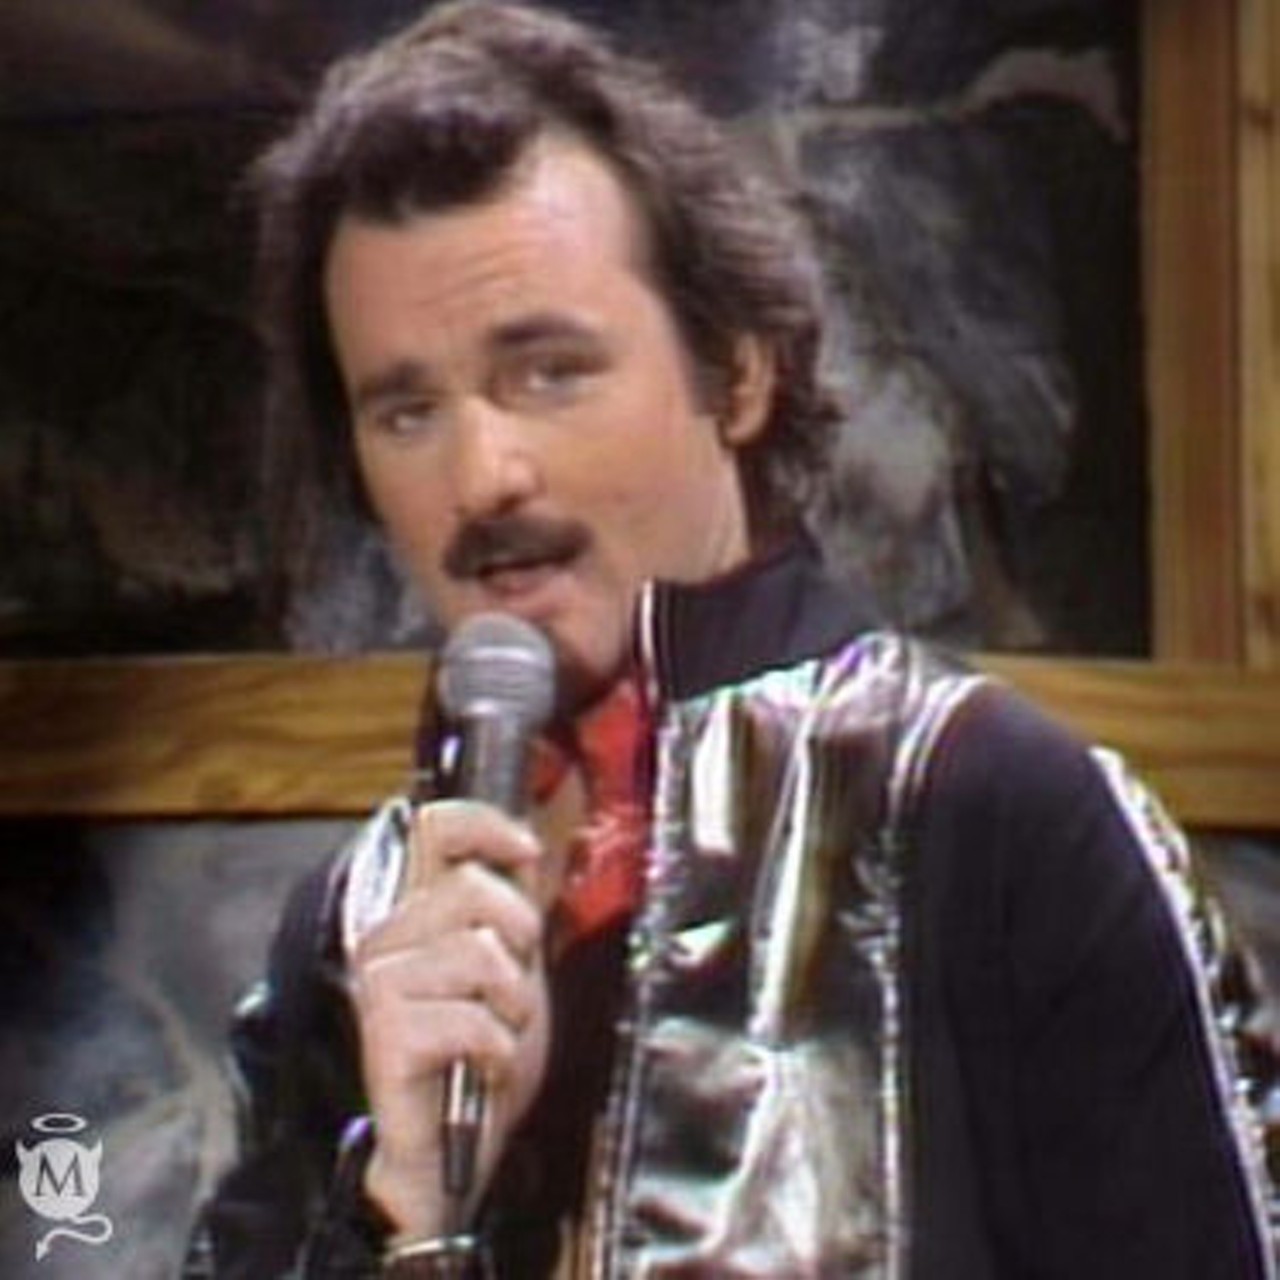 Bill Murray, who had a 'stache briefly during his time on Saturday Night Live